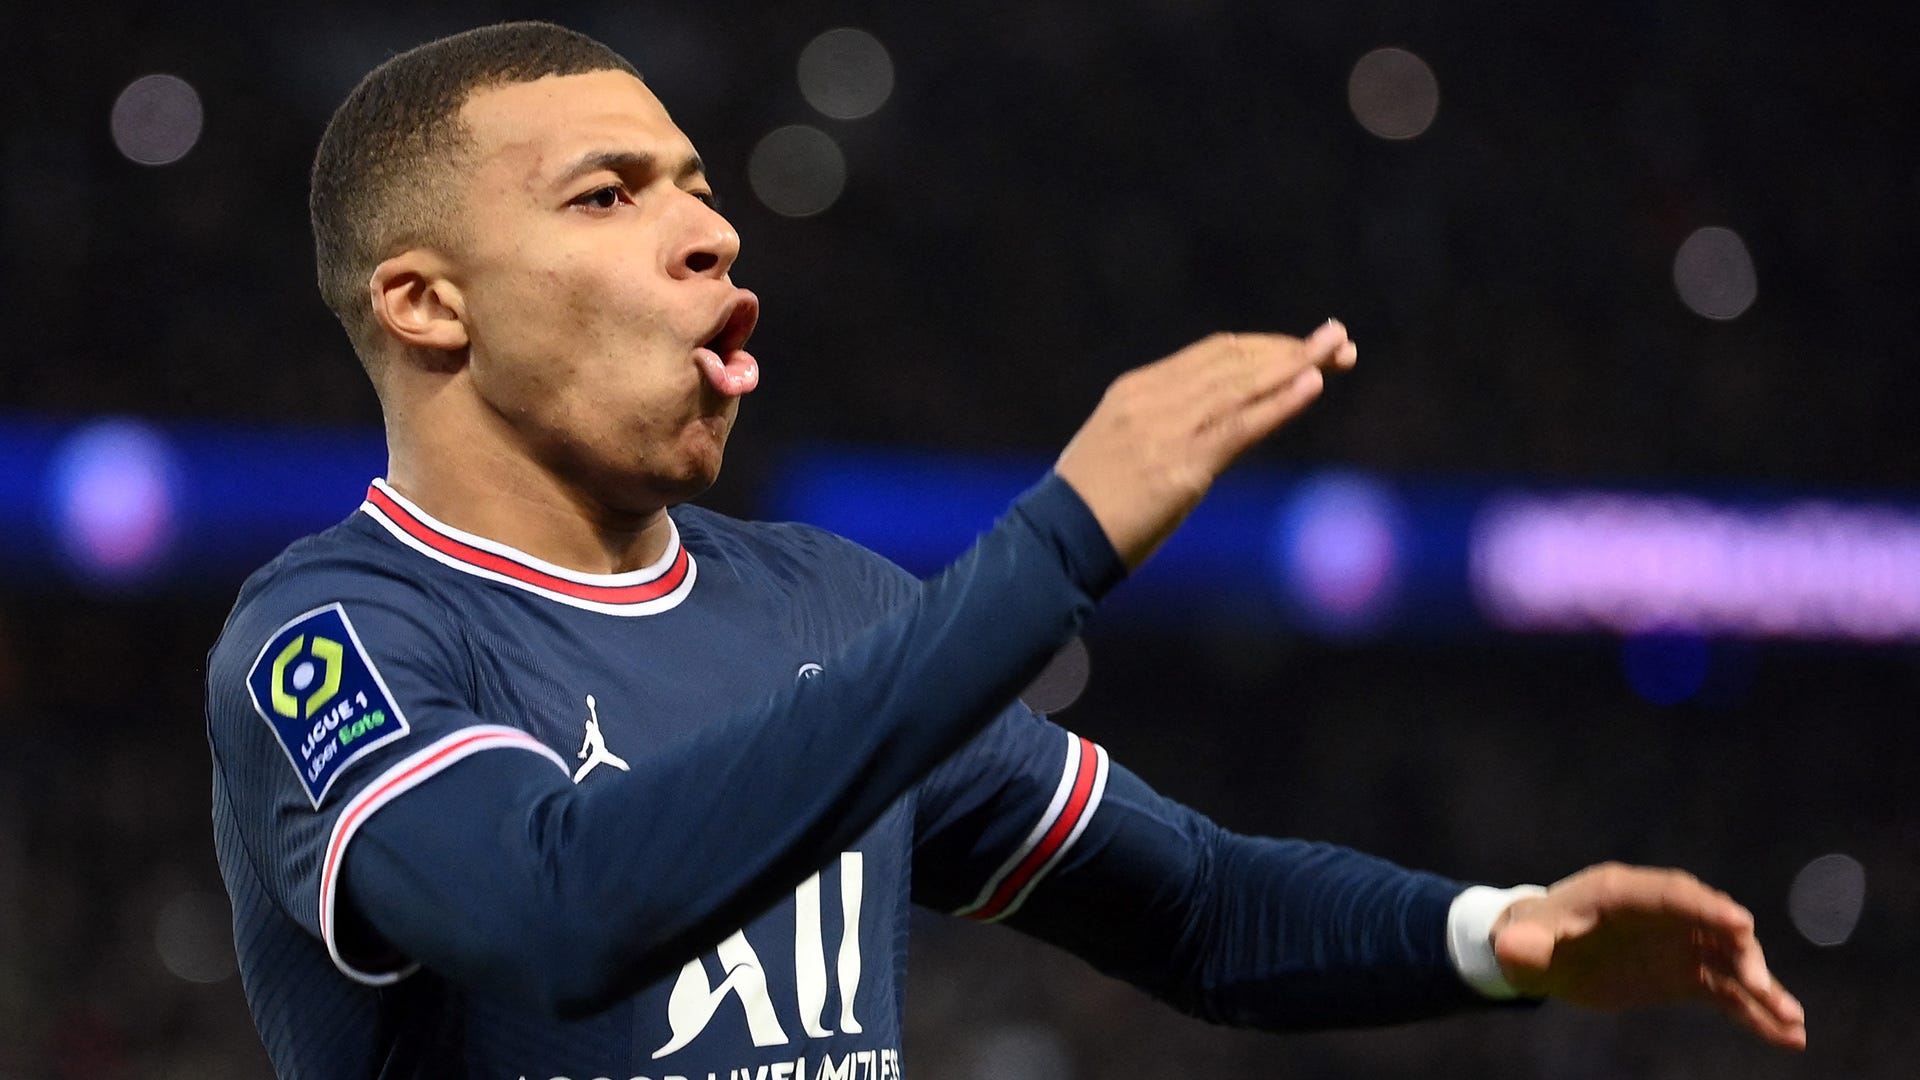 Psg To Make Mbappe The Highest Paid Player In The World Report Claims New Contract Will Be Worth Over 500k A Week Goal Com Us